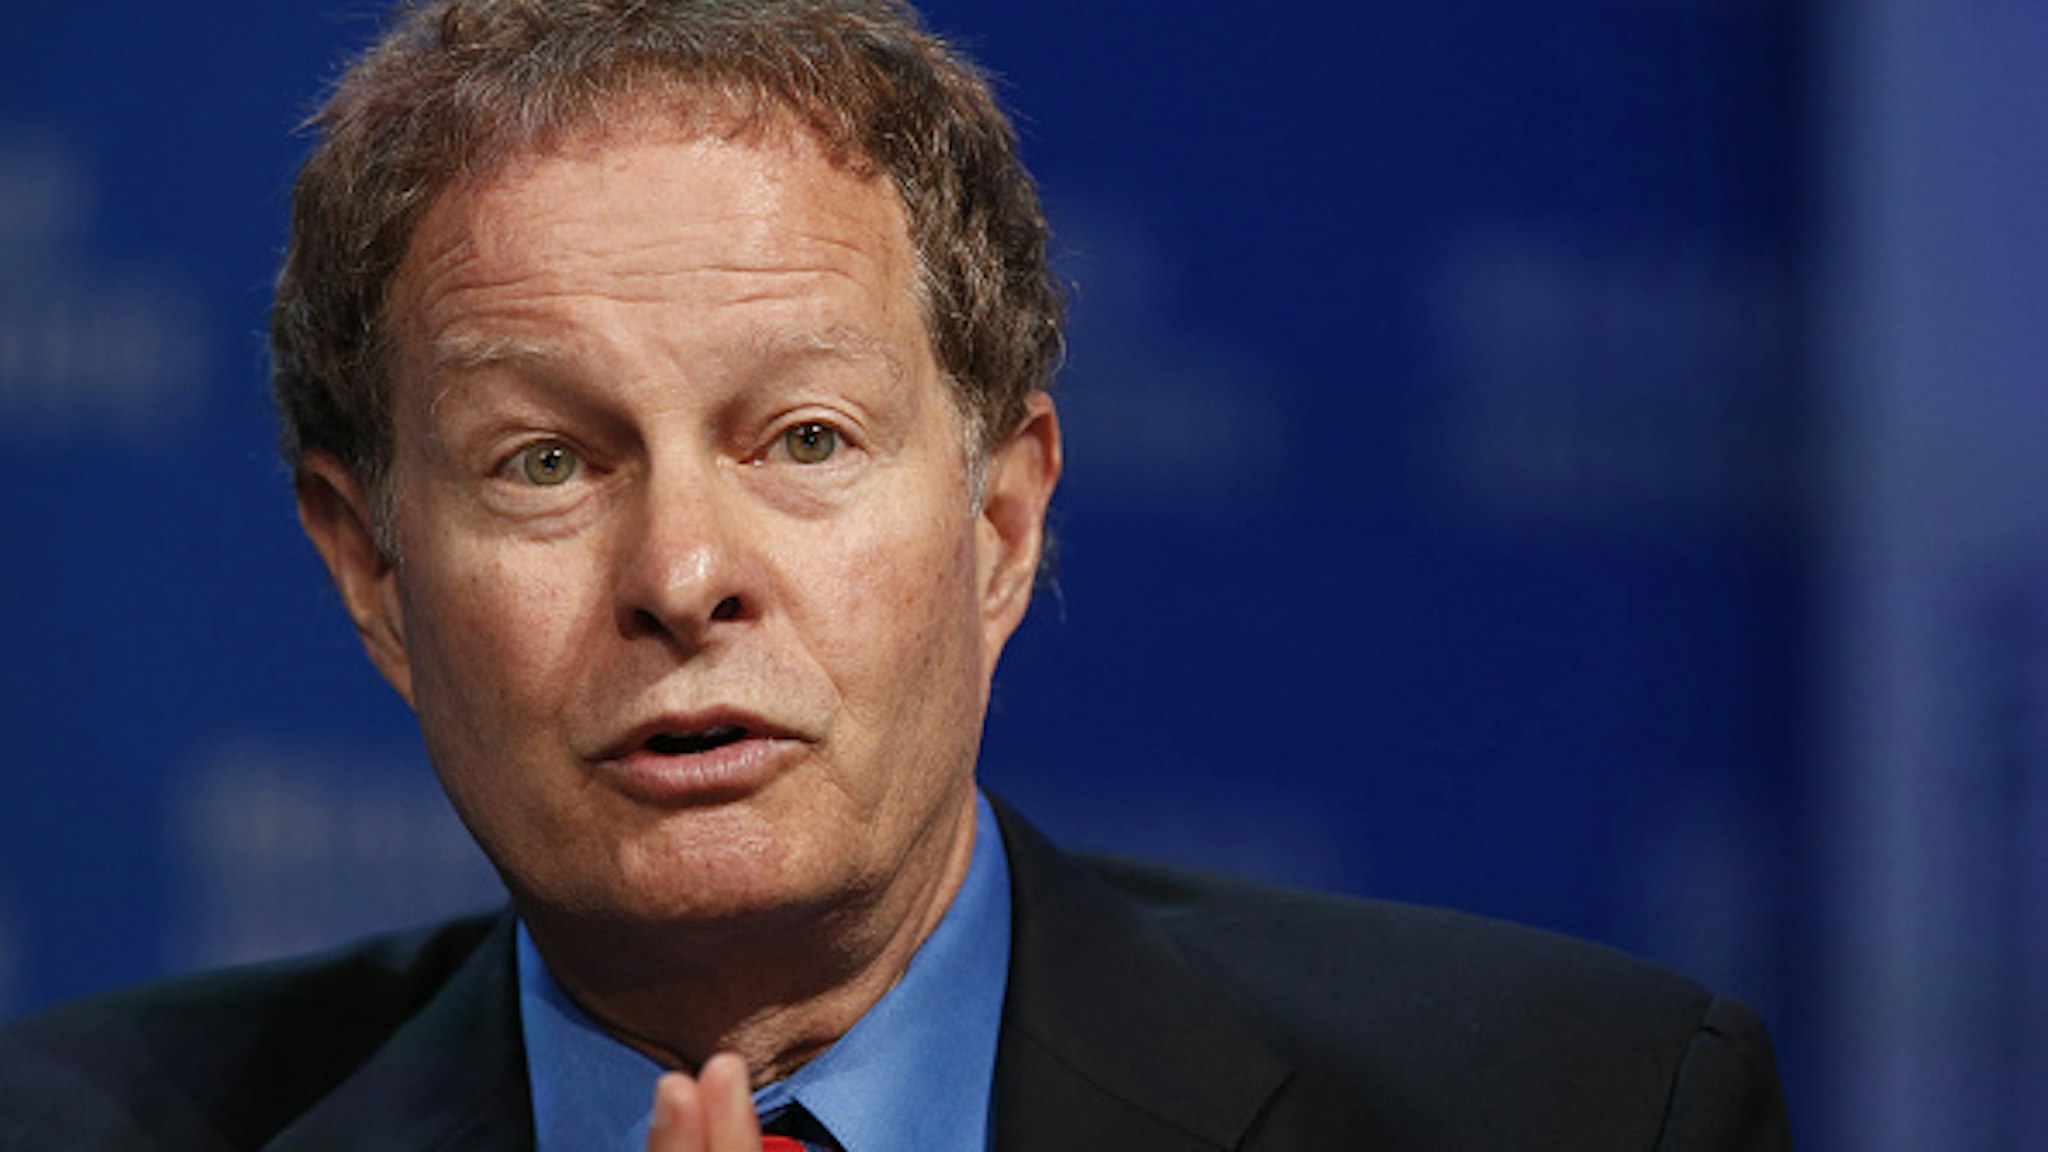 John Mackey, co-founder and co-chief executive officer of Whole Foods Market Inc., speaks during the annual Milken Institute Global Conference in Beverly Hills, California, U.S., on Monday, May 2, 2016. The conference gathers attendees to explore solutions to today's most pressing challenges in financial markets, industry sectors, health, government and education.